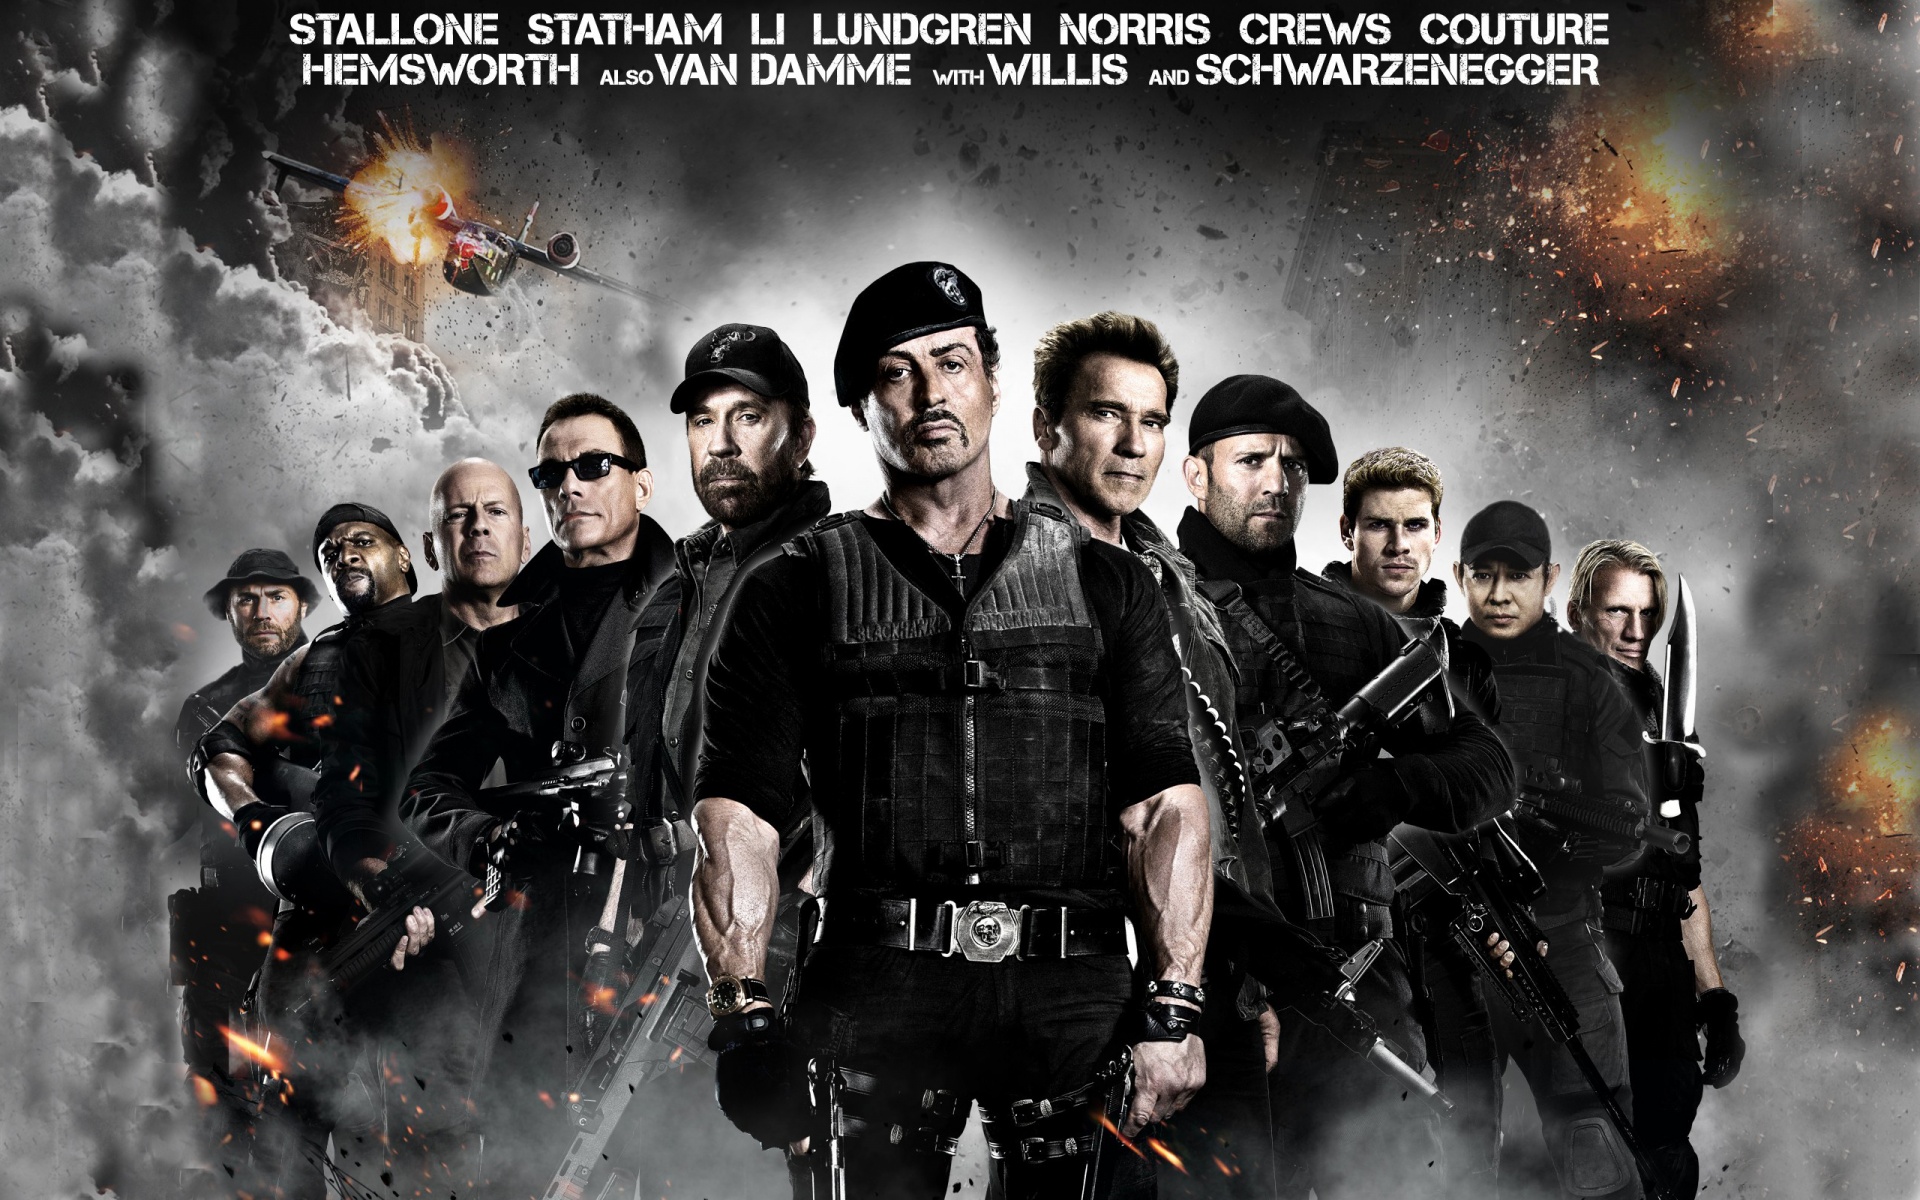 the expendables, movie, the expendables 2, arnold schwarzenegger, barney ross, billy (the expendables), booker (the expendables), bruce willis, chuck norris, church (the expendables), dolph lundgren, gunnar jensen, hale caesar, jason statham, jean claude van damme, jet li, lee christmas, liam hemsworth, randy couture, sylvester stallone, terry crews, toll road, trench (the expendables), vilain (the expendables), yin yang (the expendables) 5K